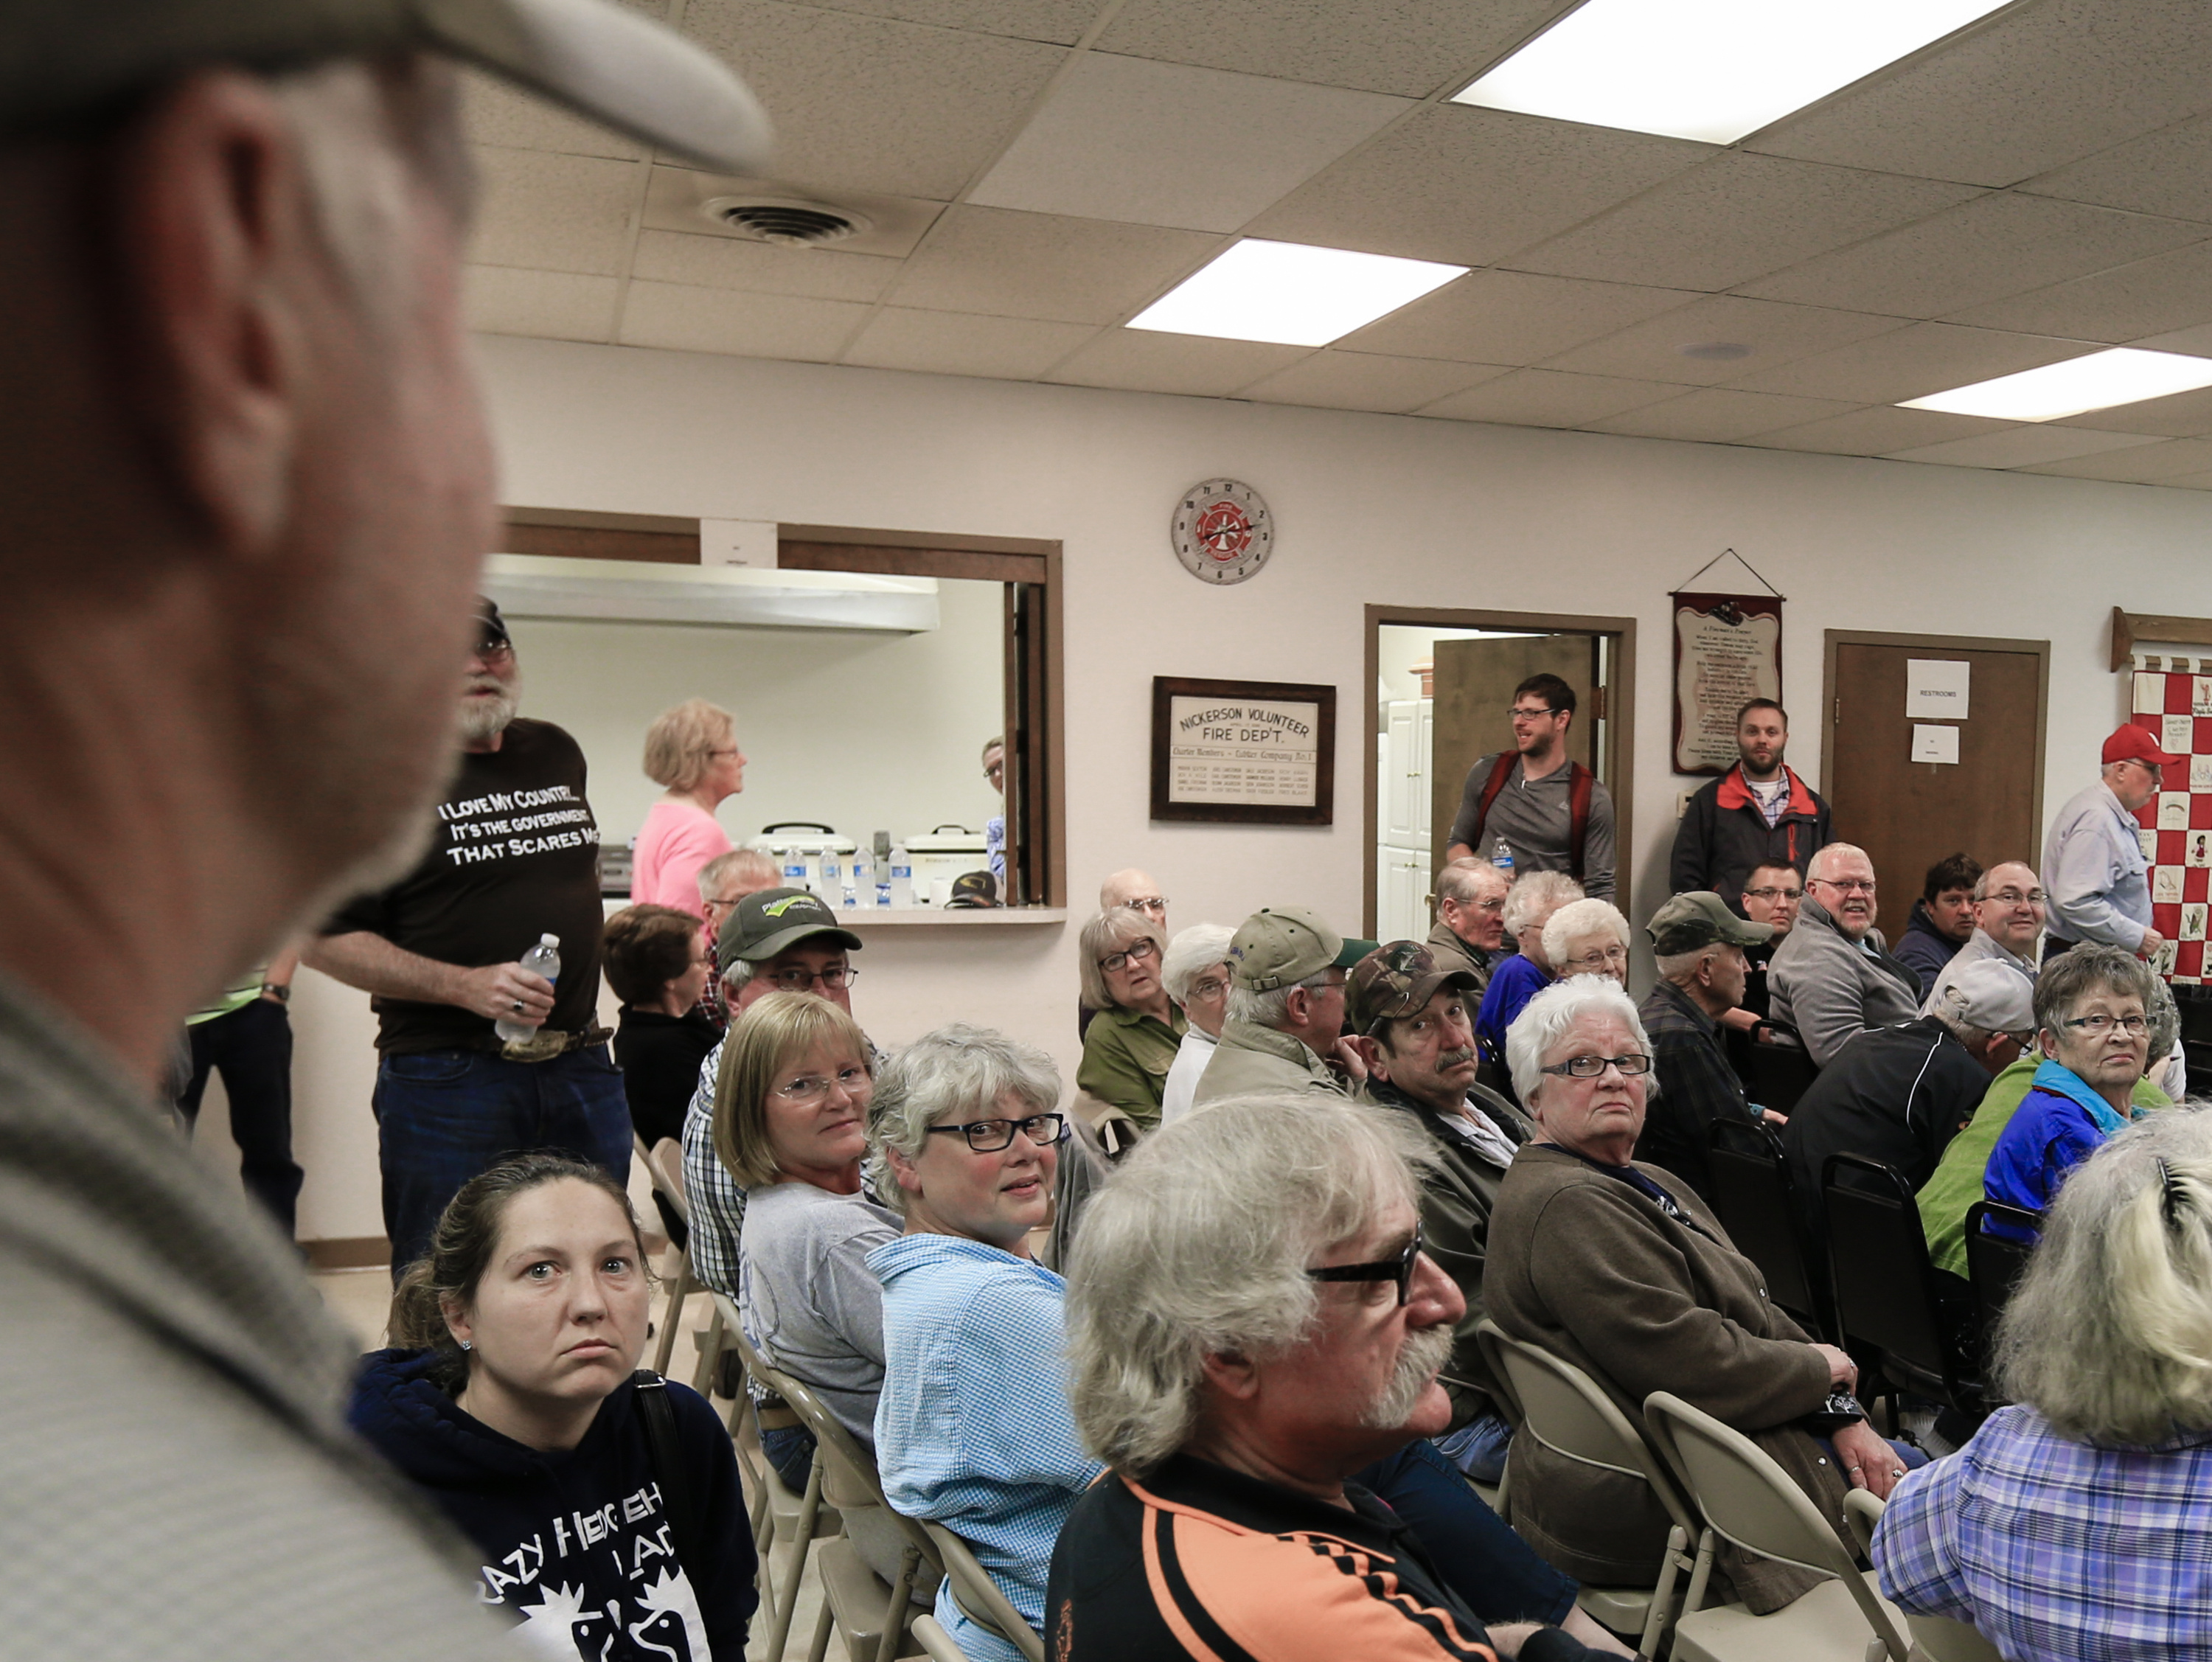 Residents of Nickerson, Neb., turn in their seats towards Randy Ruppert, left, during a meeting at the Nickerson, Neb., fire hall, Tuesday, April 19, 2016. When regional officials announced plans to open a $300 million chicken processing plant employing 1,100 workers, residents packed the firehall and the village board unanimously voted against the plant, and a week later the company gave up, saying theyd take their plant and jobs elsewhere. (AP Photo/Nati Harnik)